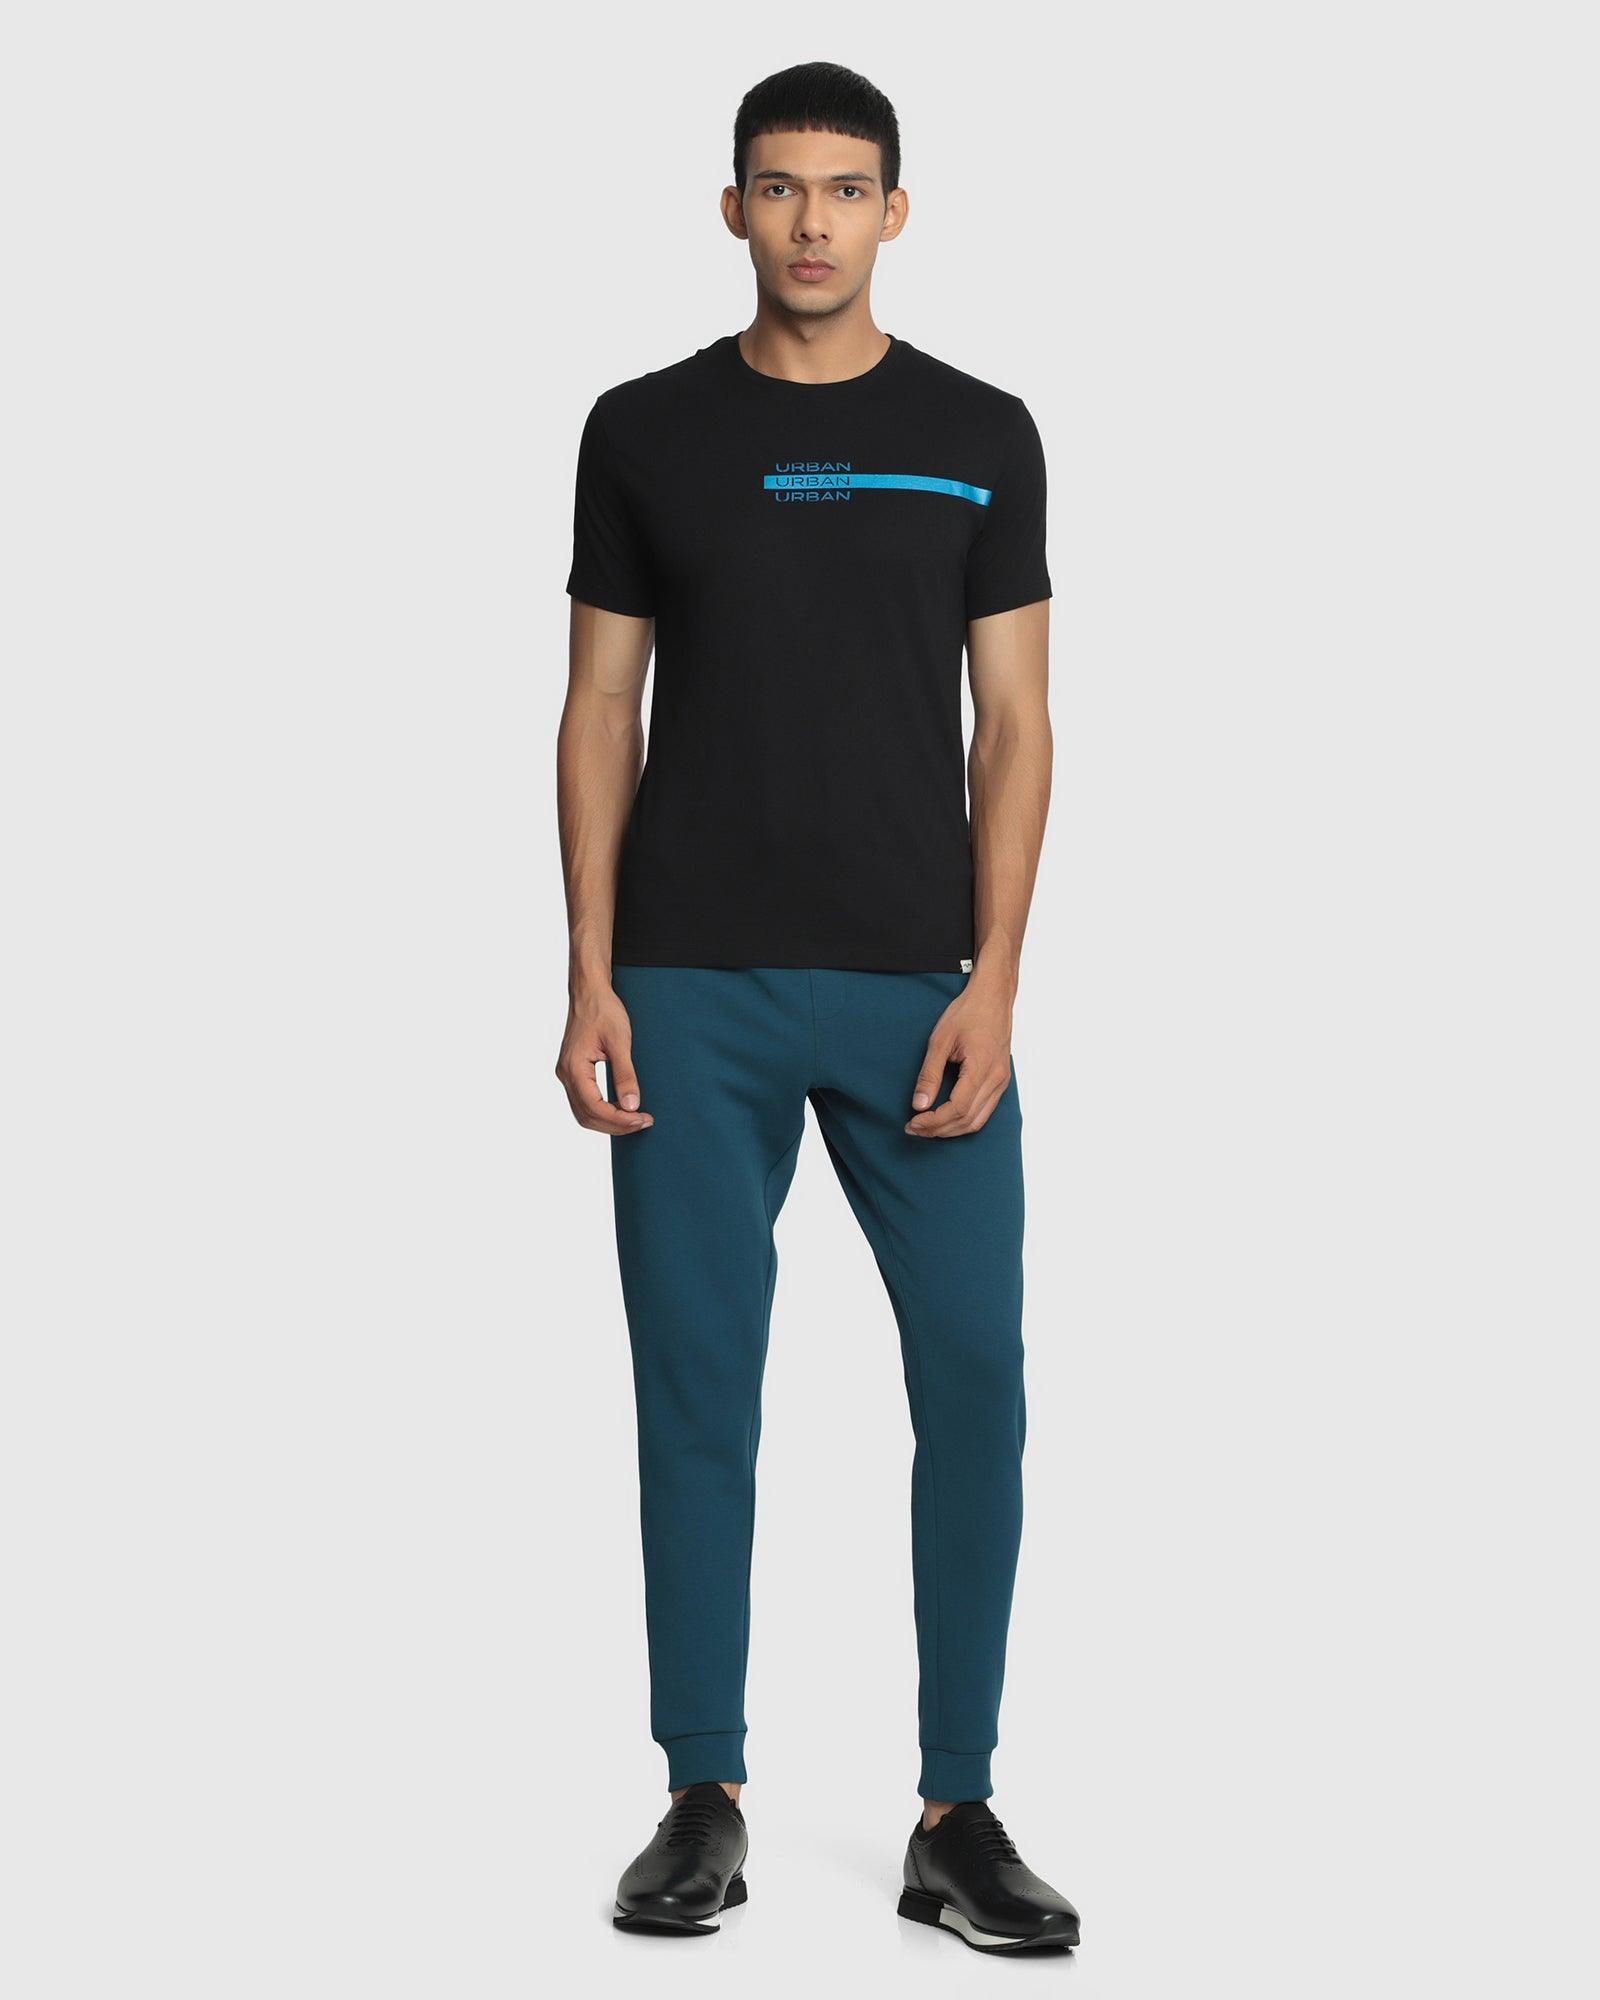 VAN HEUSEN Black Trousers VWTFURGBH43456 - 26 in Chennai at best price by Urban  Touch Showroom - Justdial